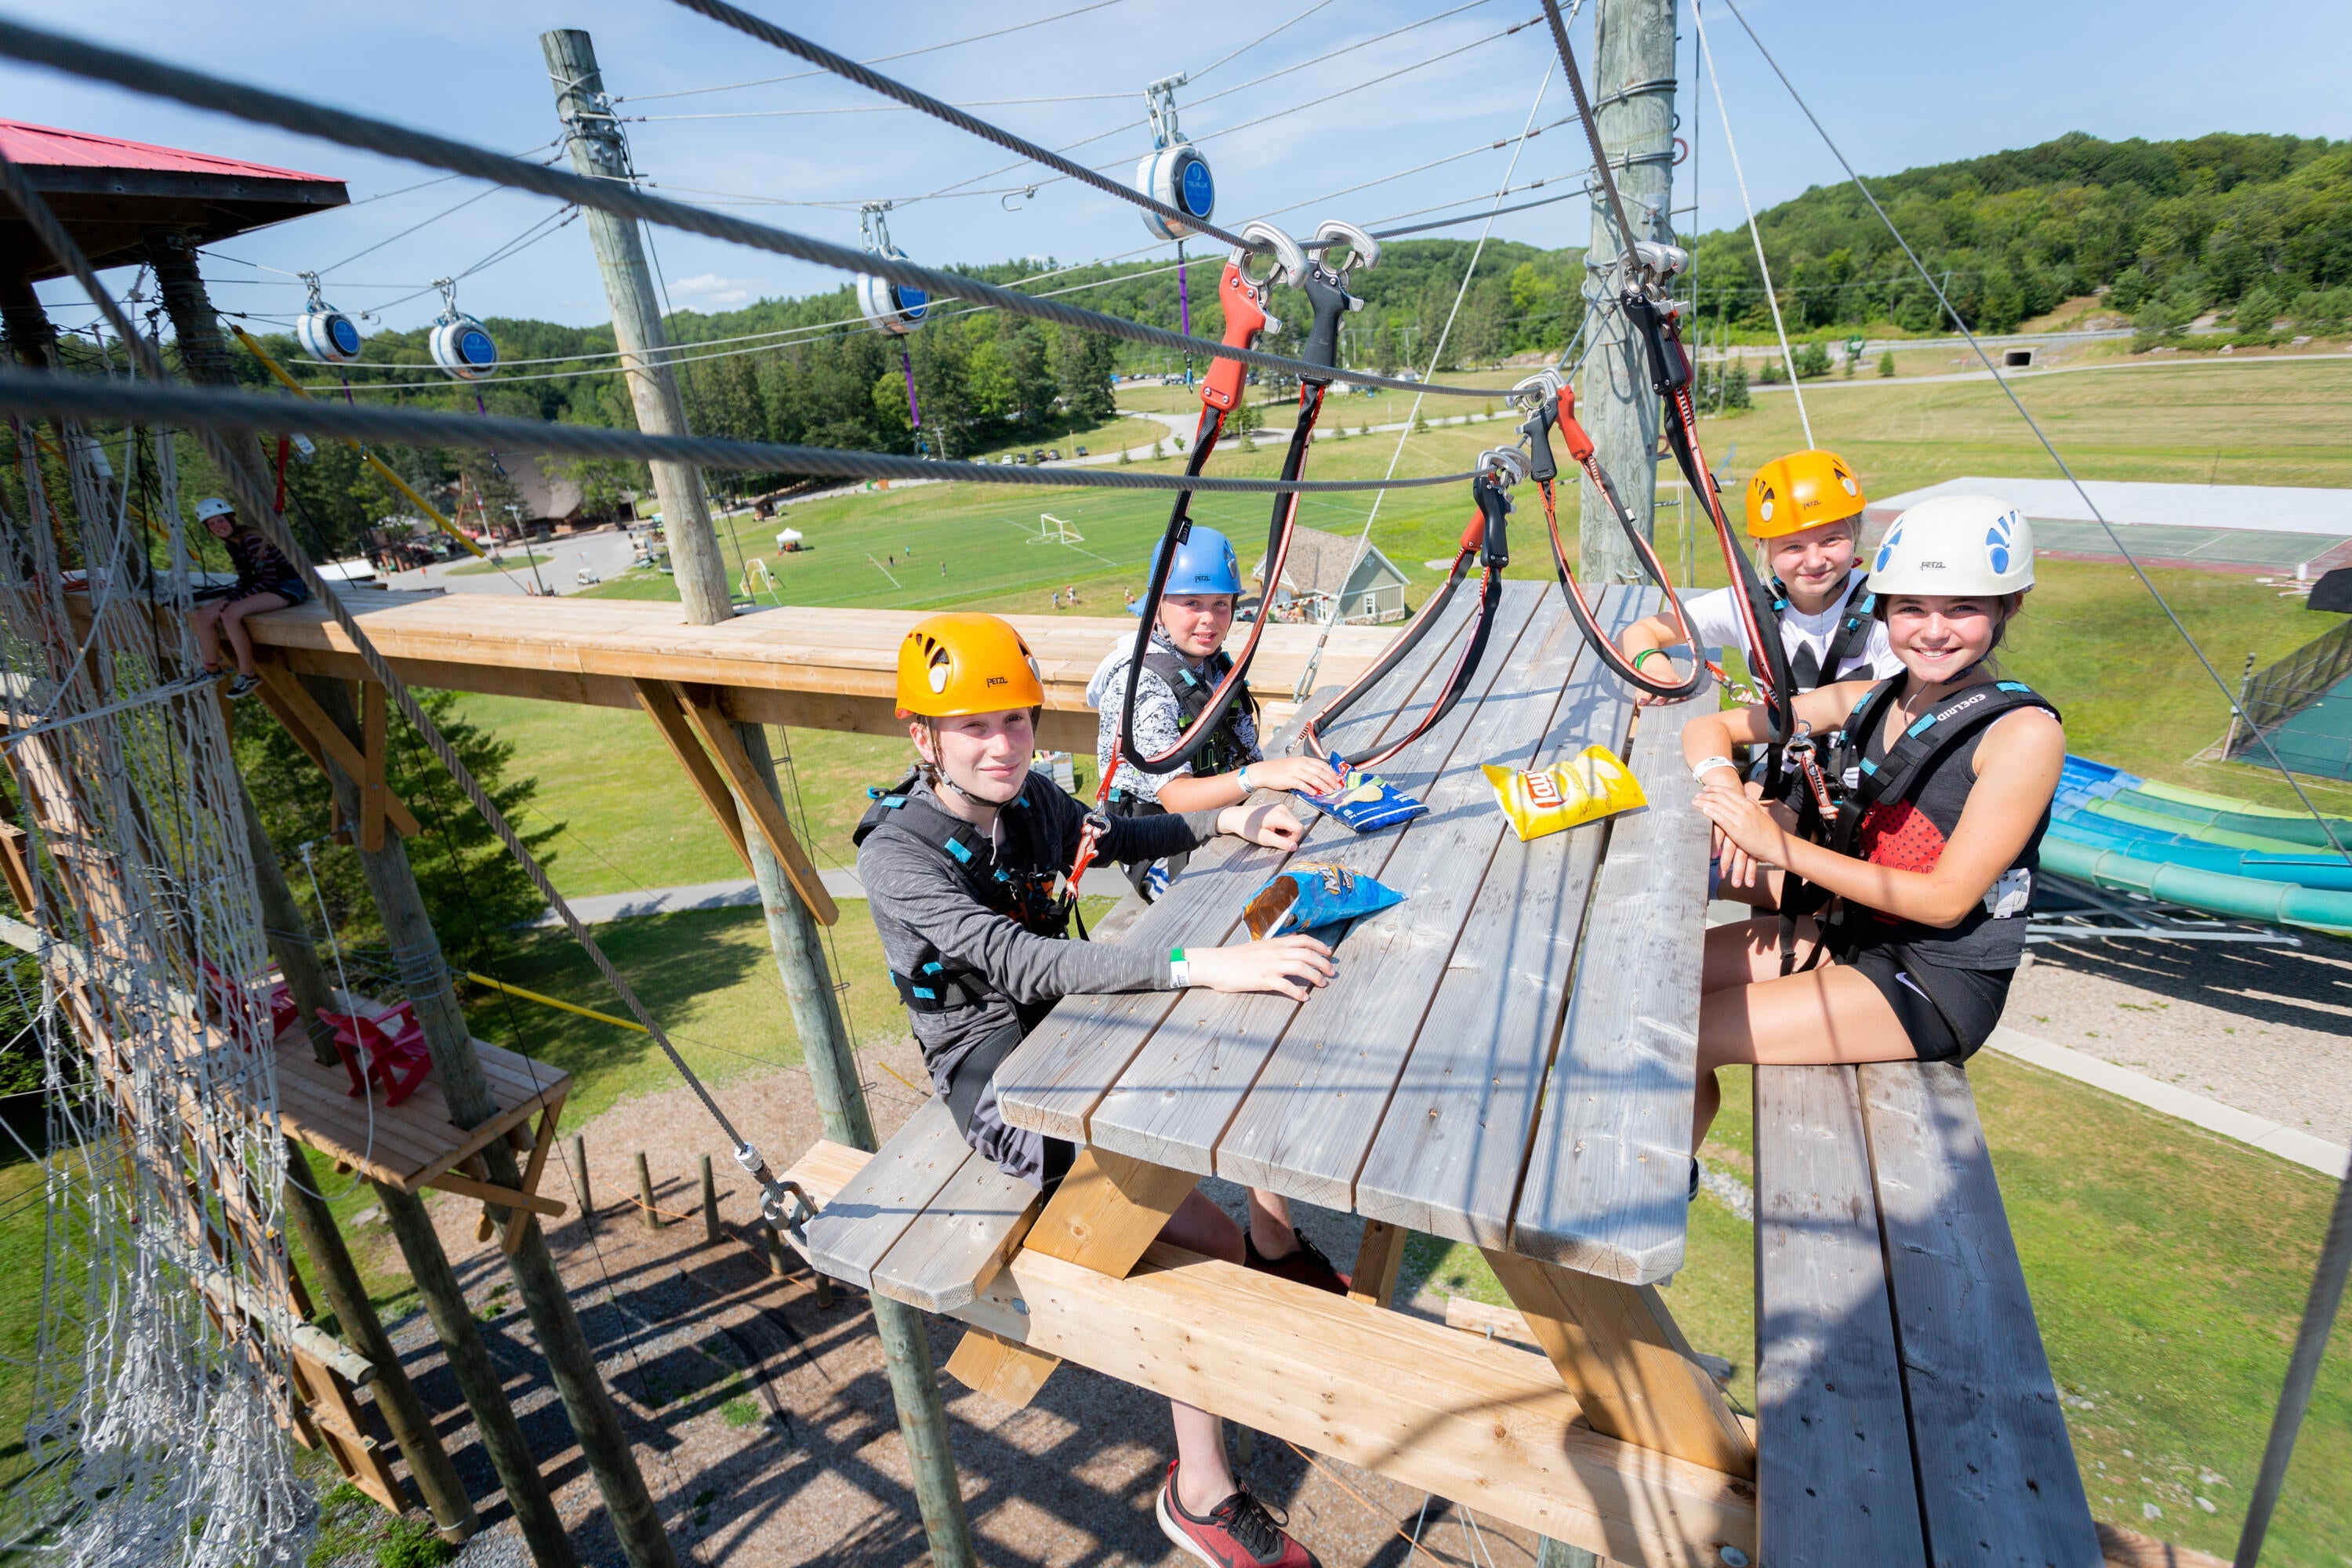 Campers sitting on zip-line picnic bench at Muskoka Woods camp in the summer